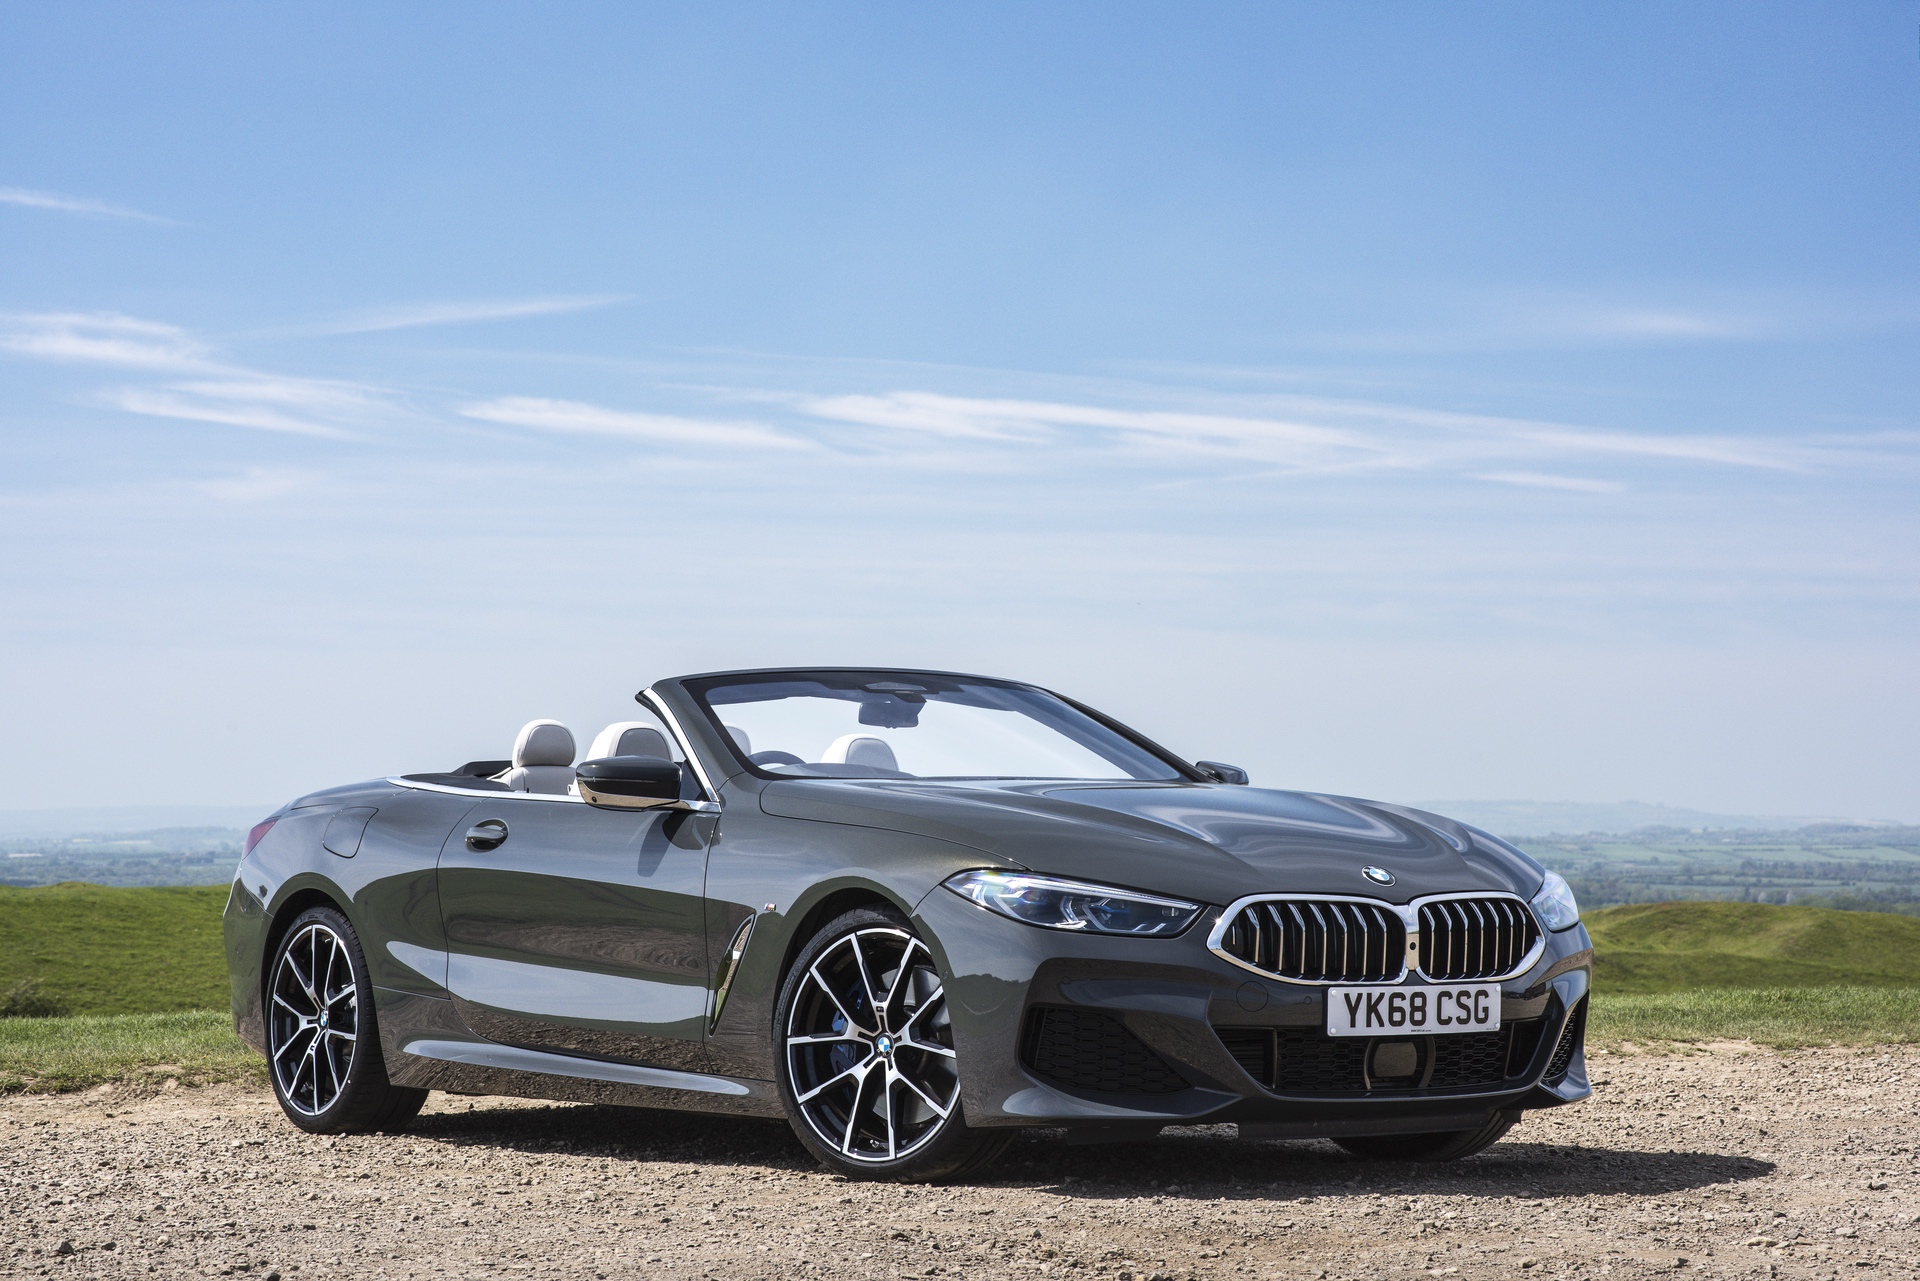 2019 BMW 840d Convertible goes for a photoshoot in the UK